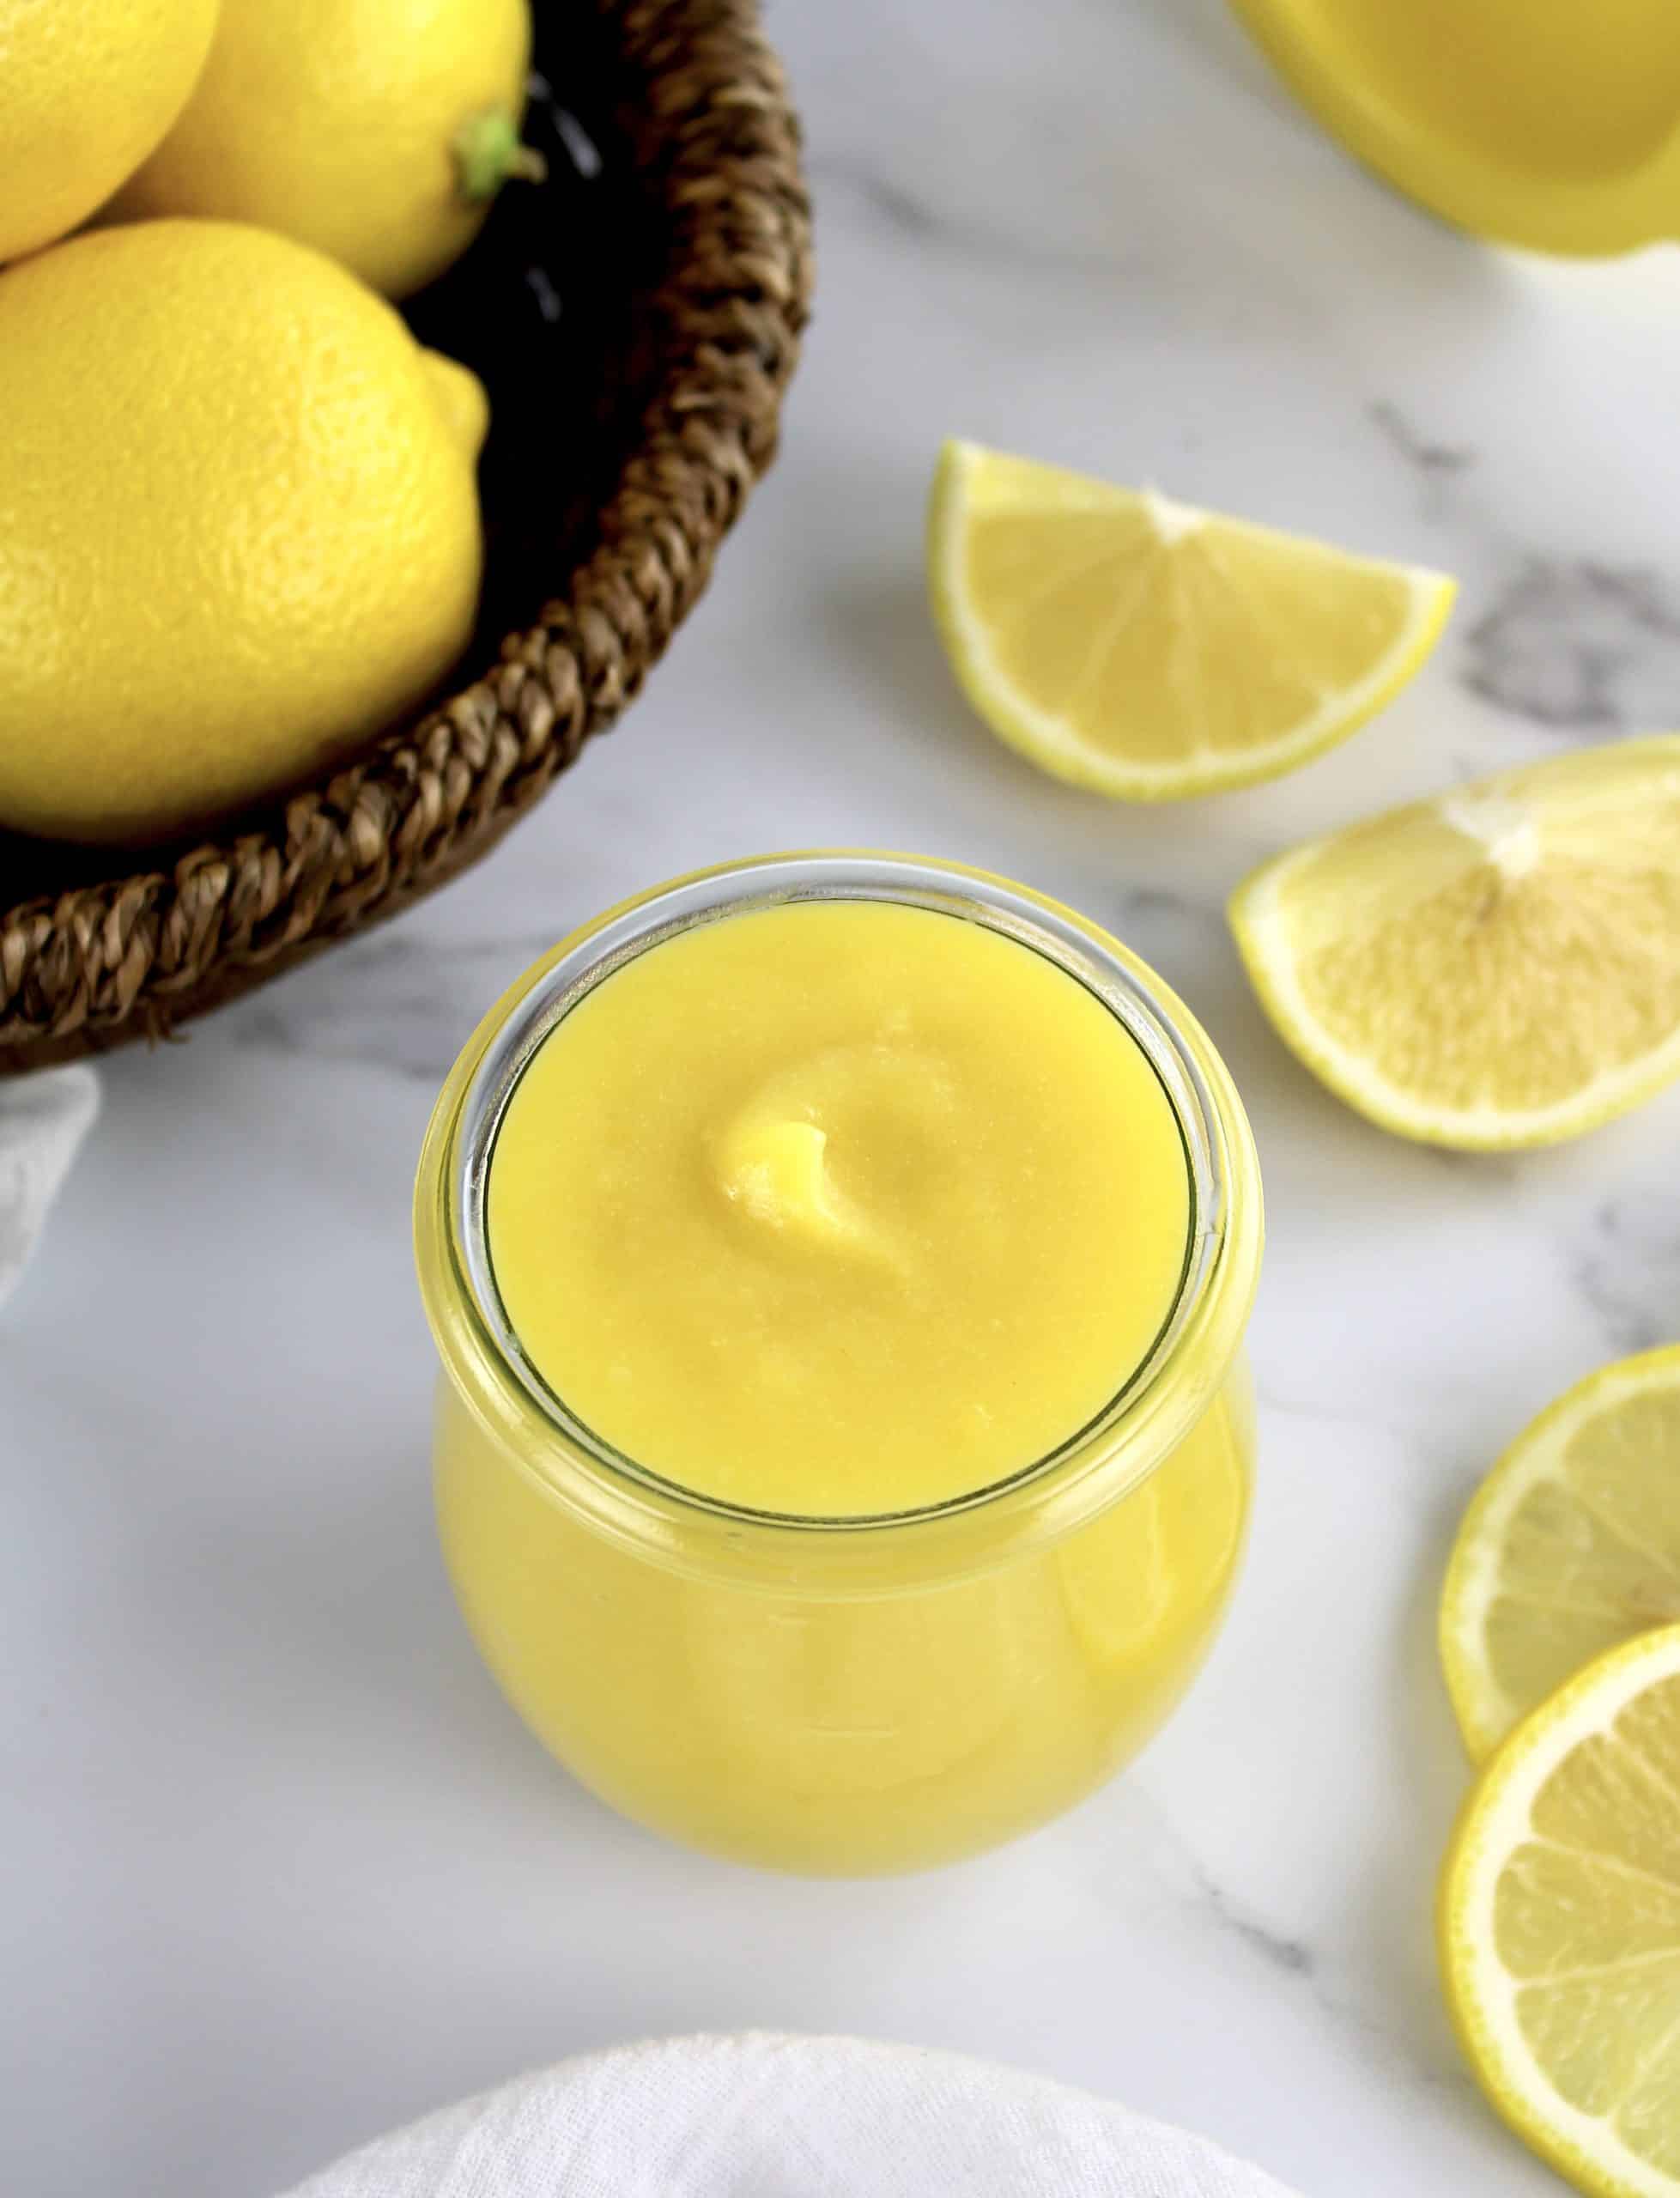 5 Minute Keto Lemon Curd in glass jar with lemon slices and whole lemons in background